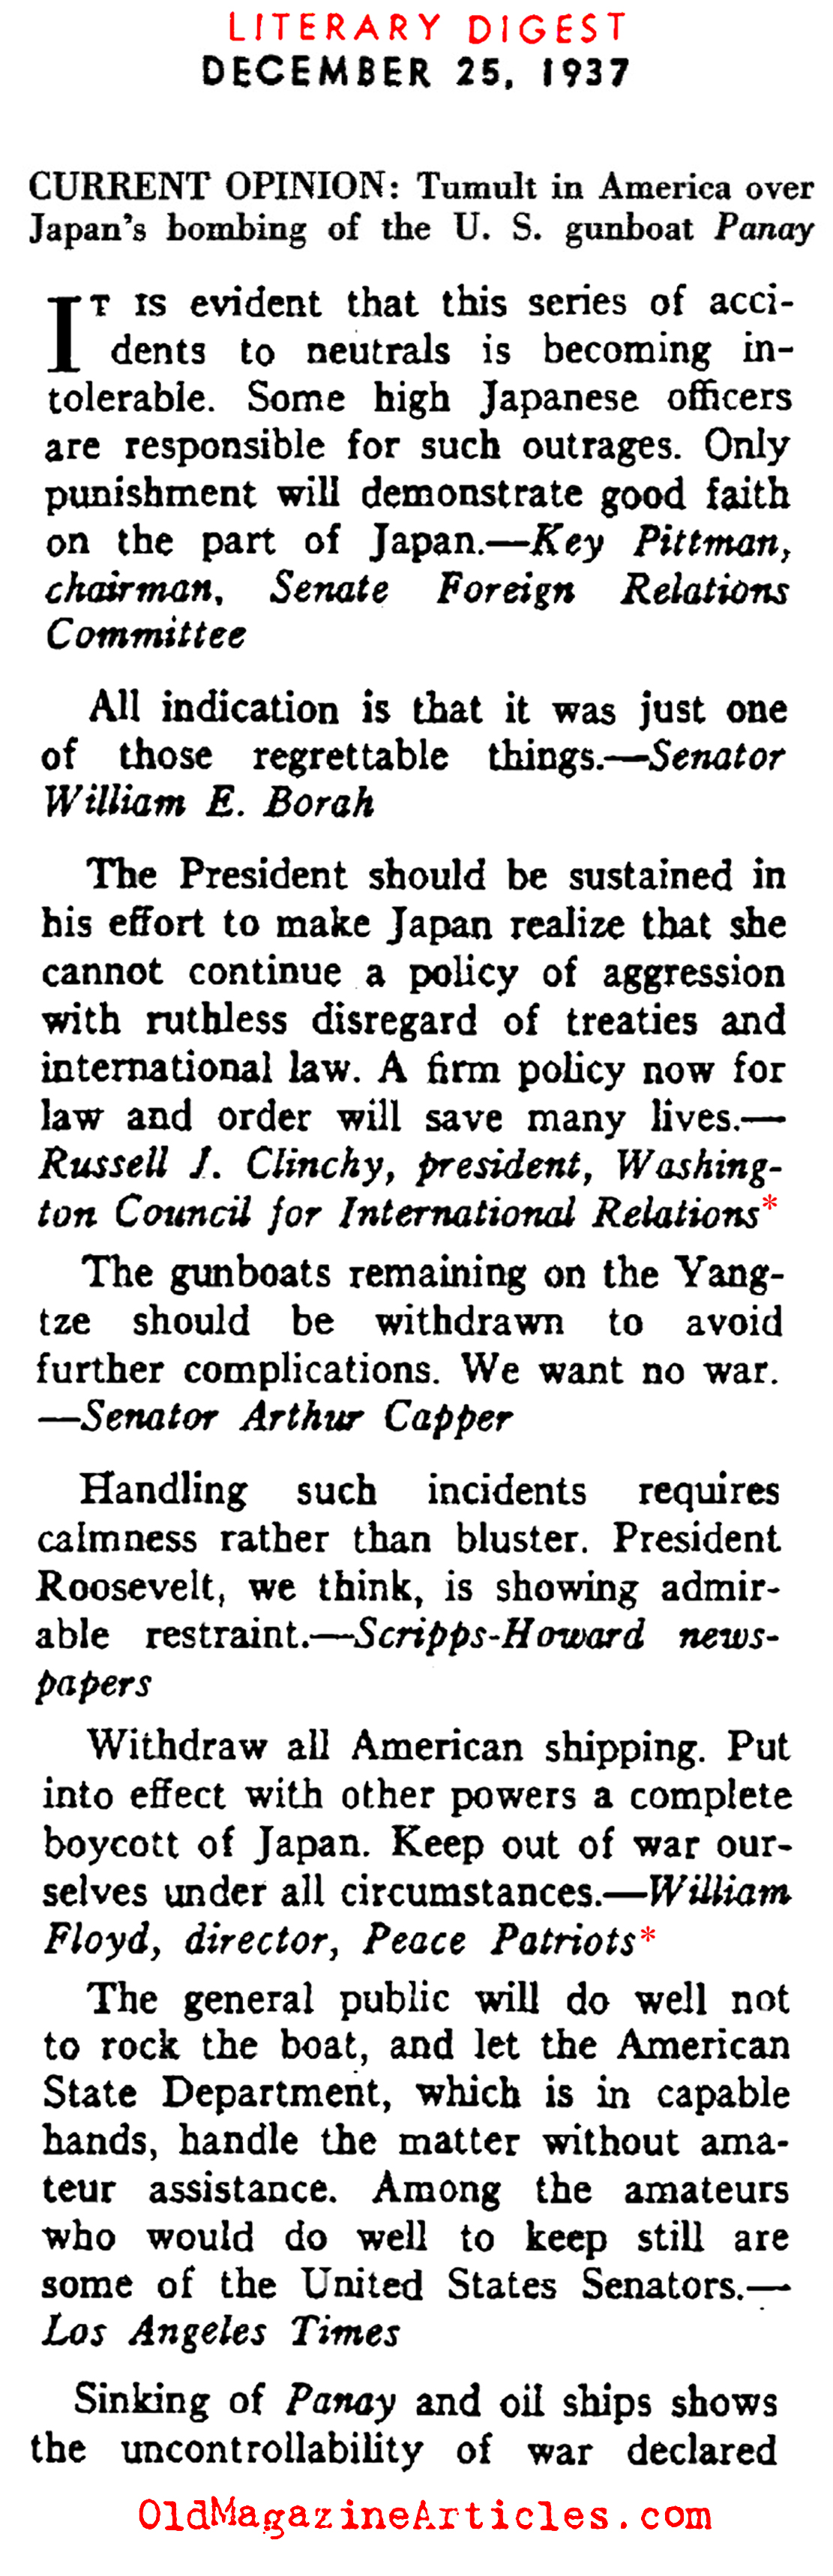 President Roosevelt and the Panay Incident (Literary Digest, 1937)